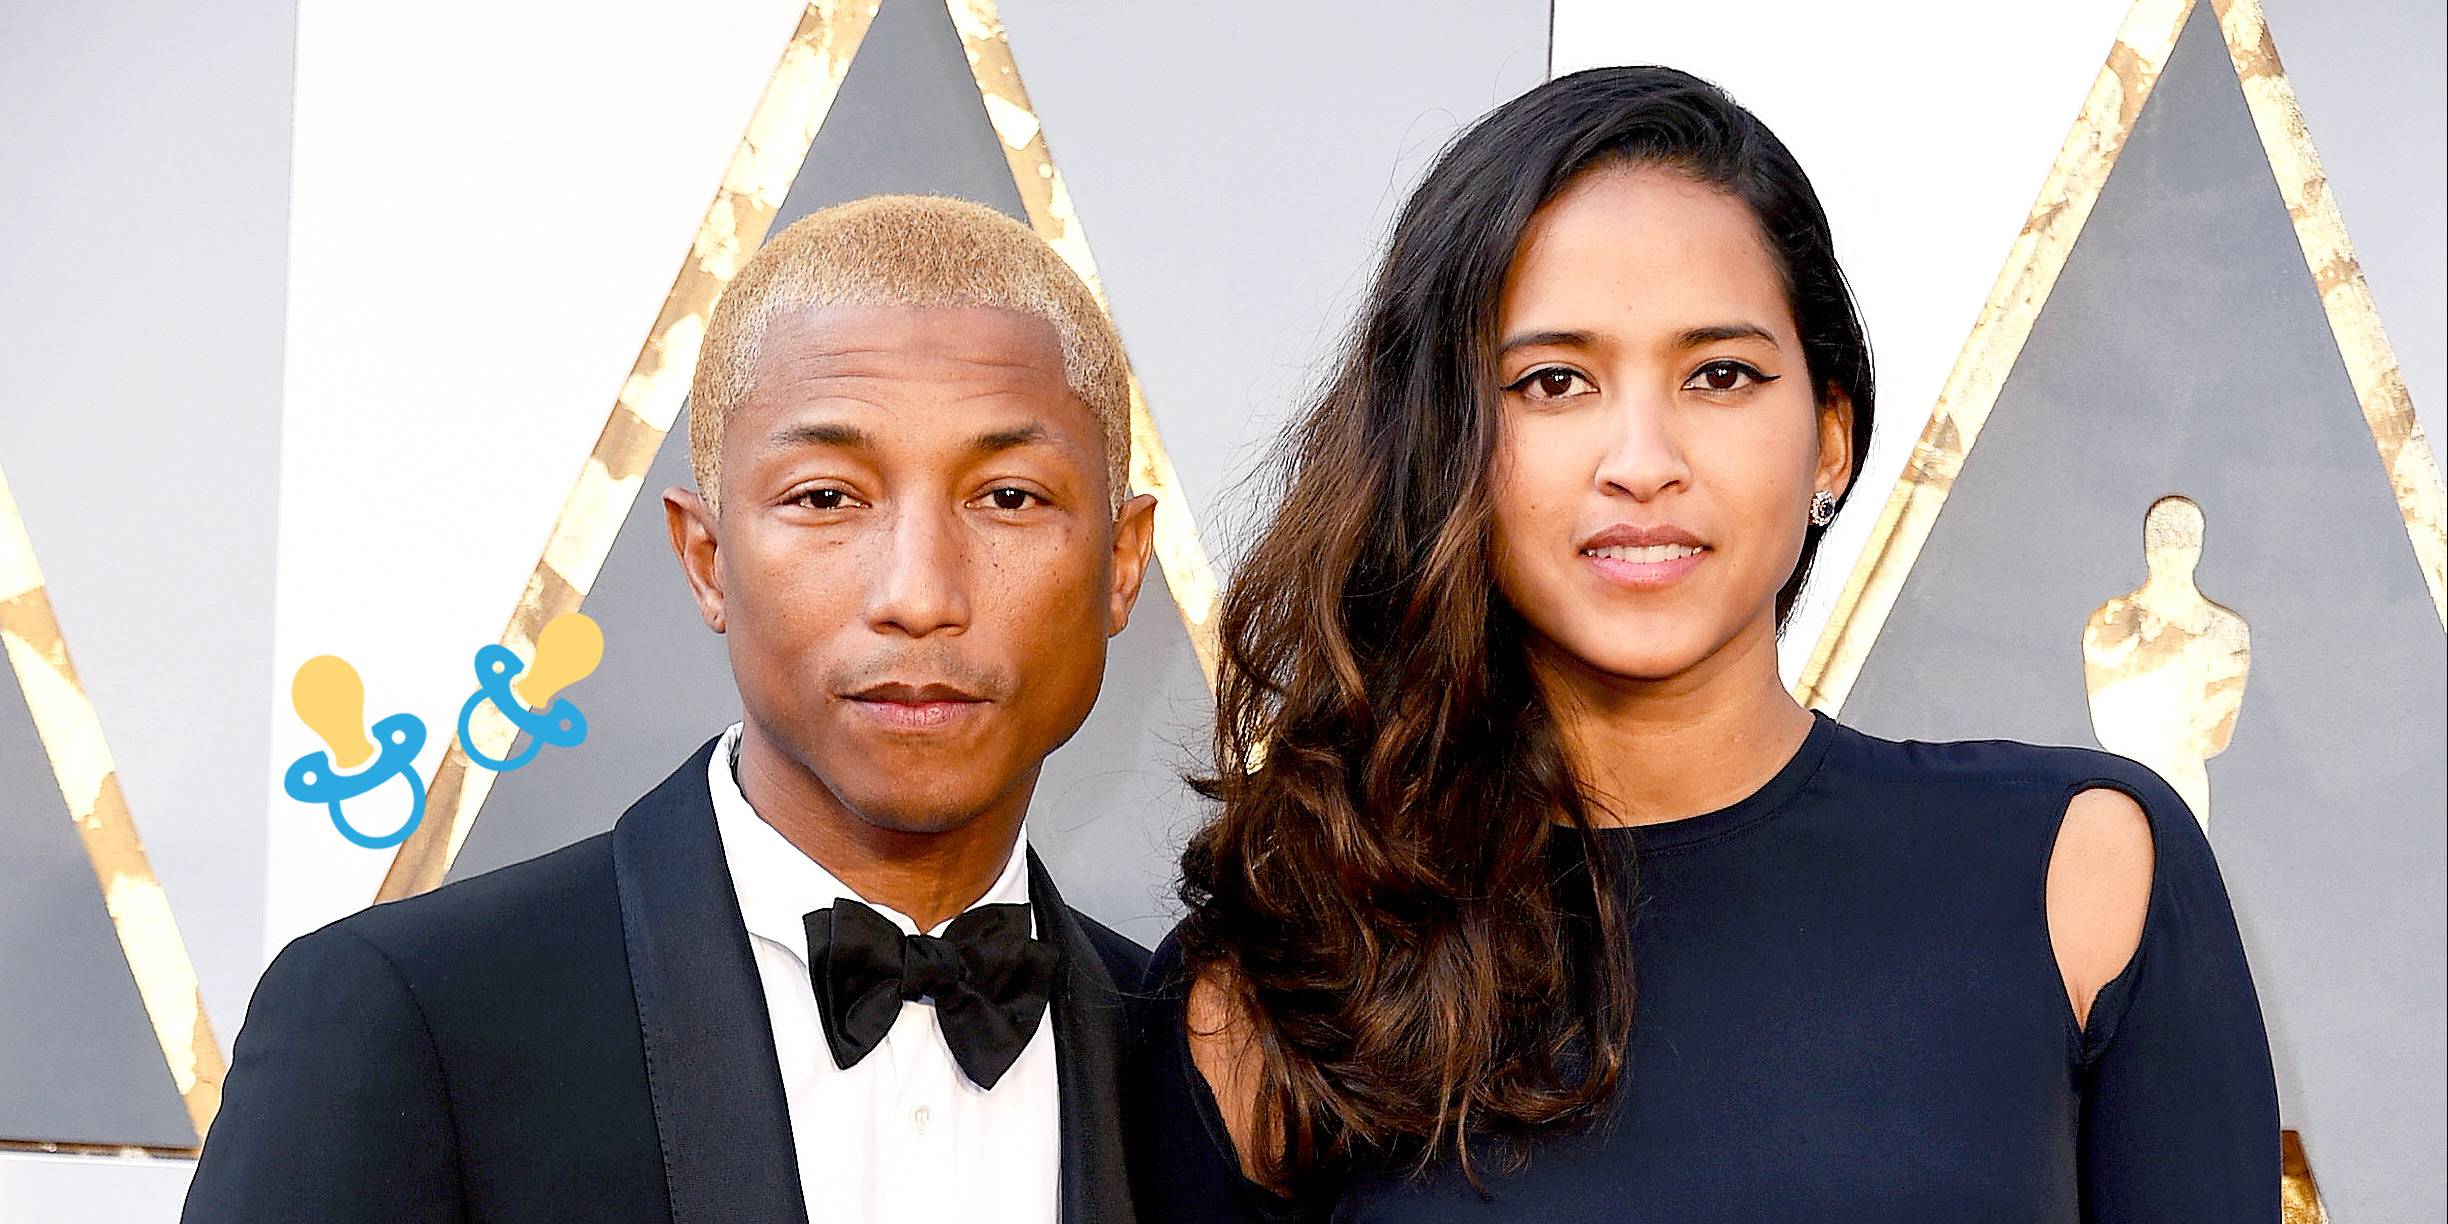 Helen Lasichanh's biography: who is Pharrell Williams' wife? 